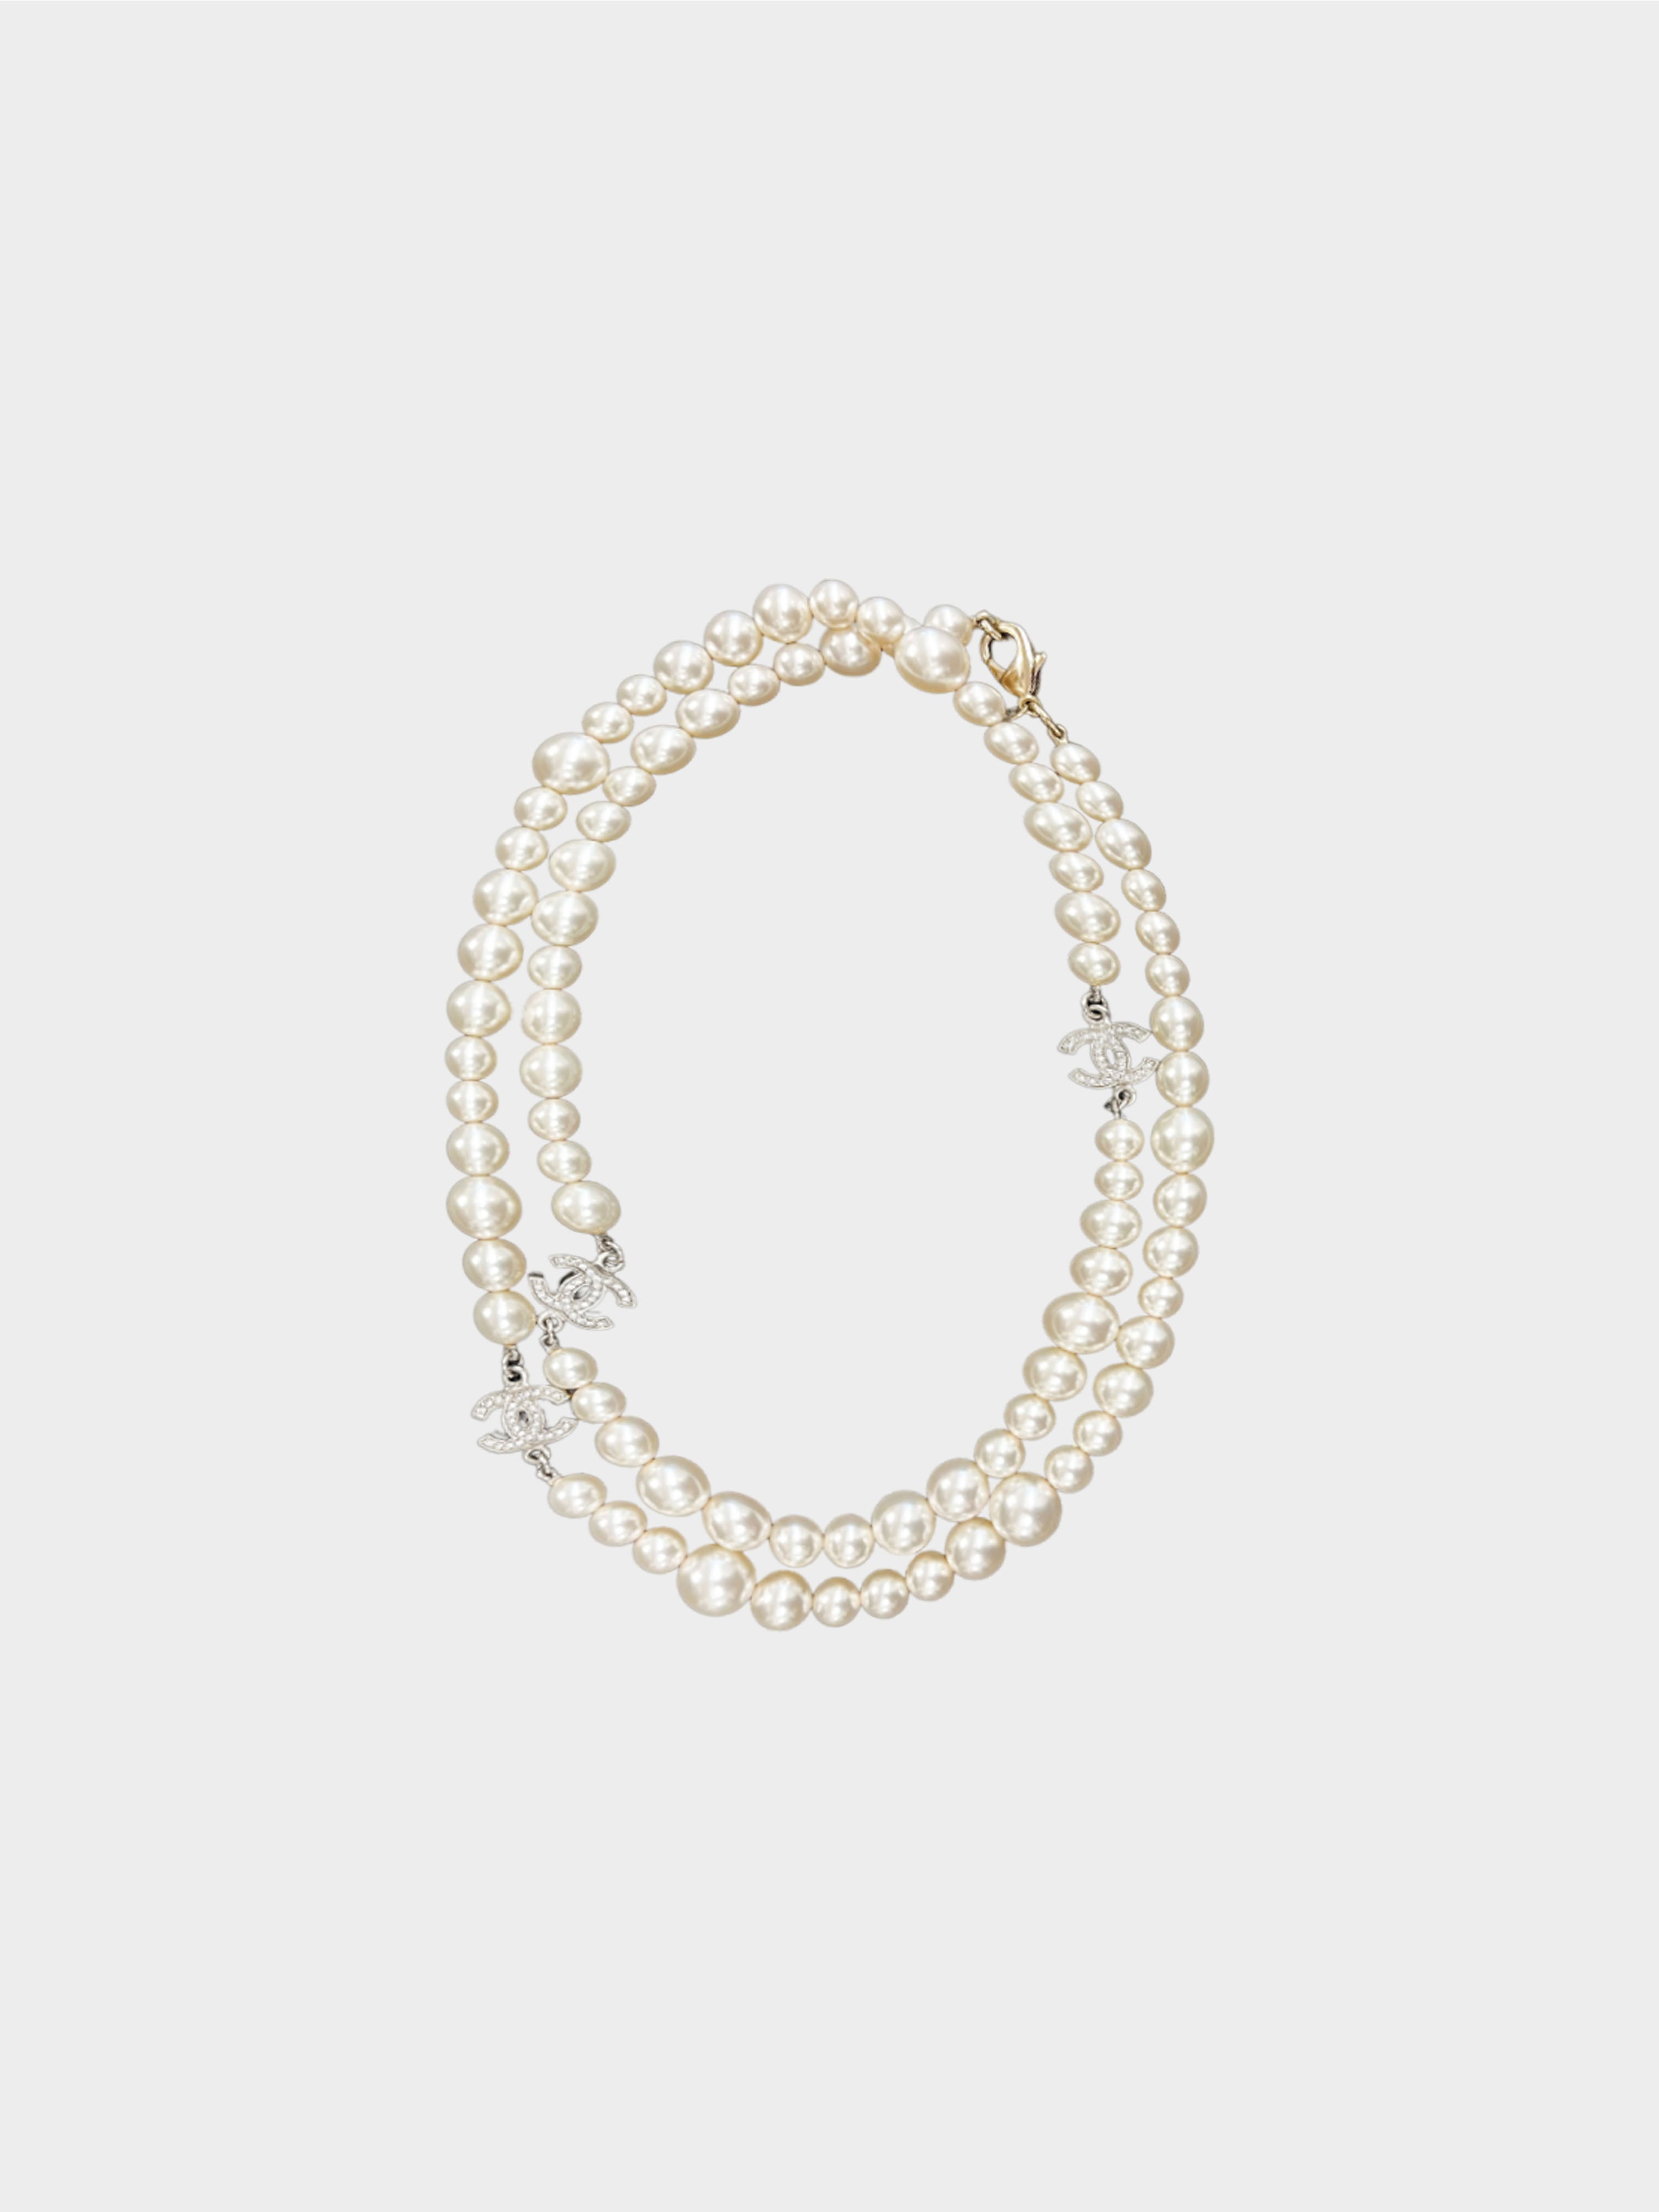 Chanel Multi Strand CC Necklace Crystal Embellished Metal with Faux Pearls